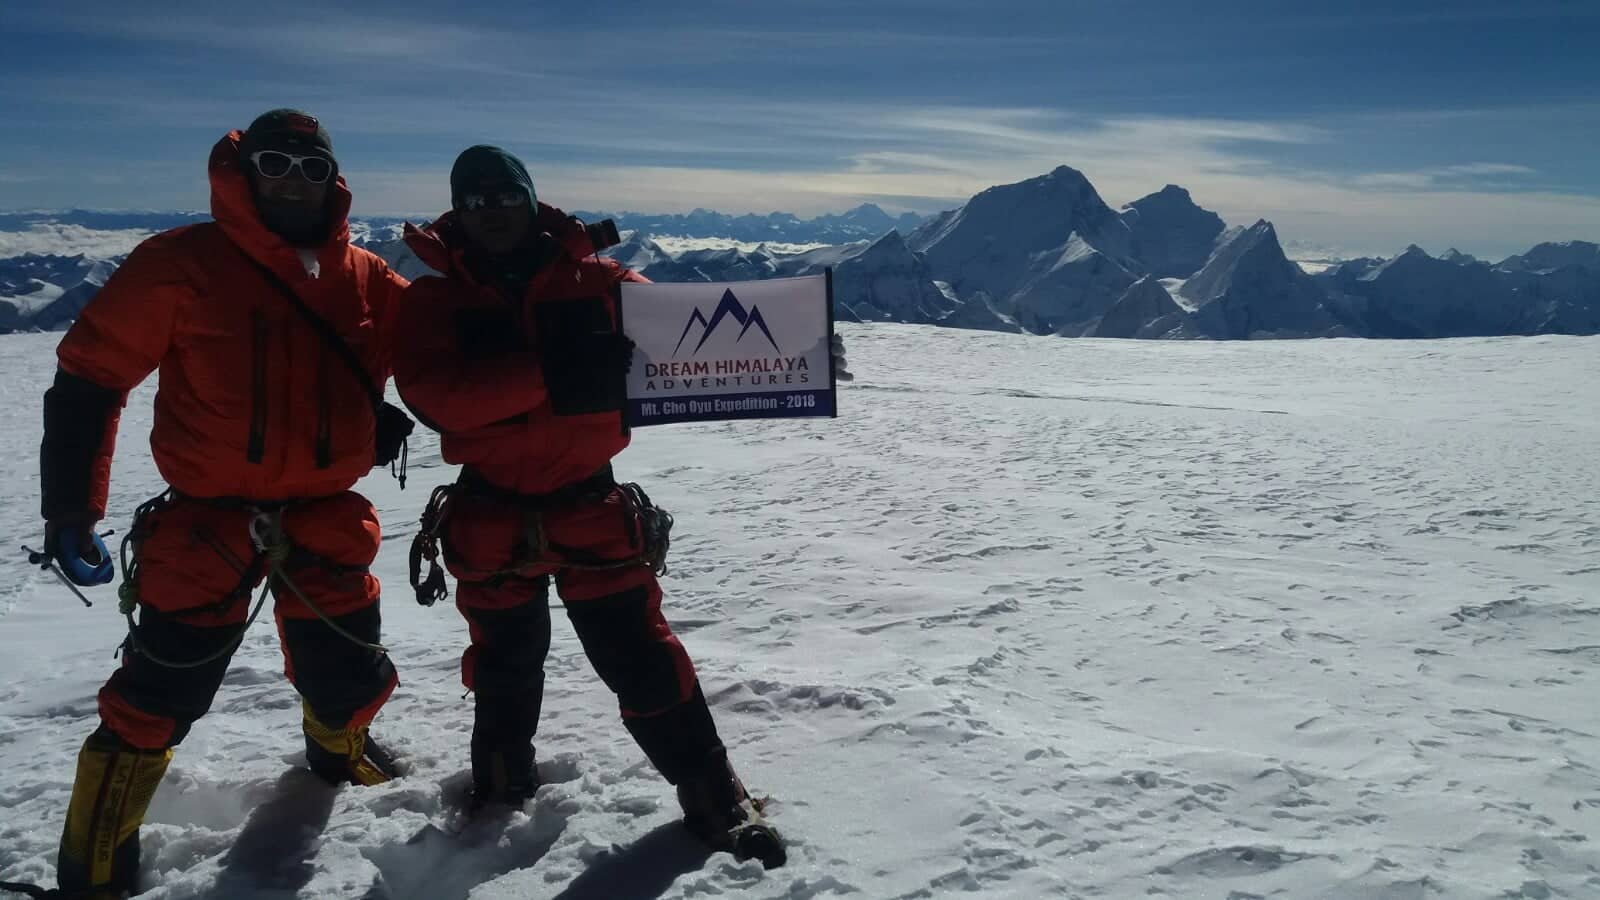 Furi sherpa on the summit of mt Cho Oyu expedition